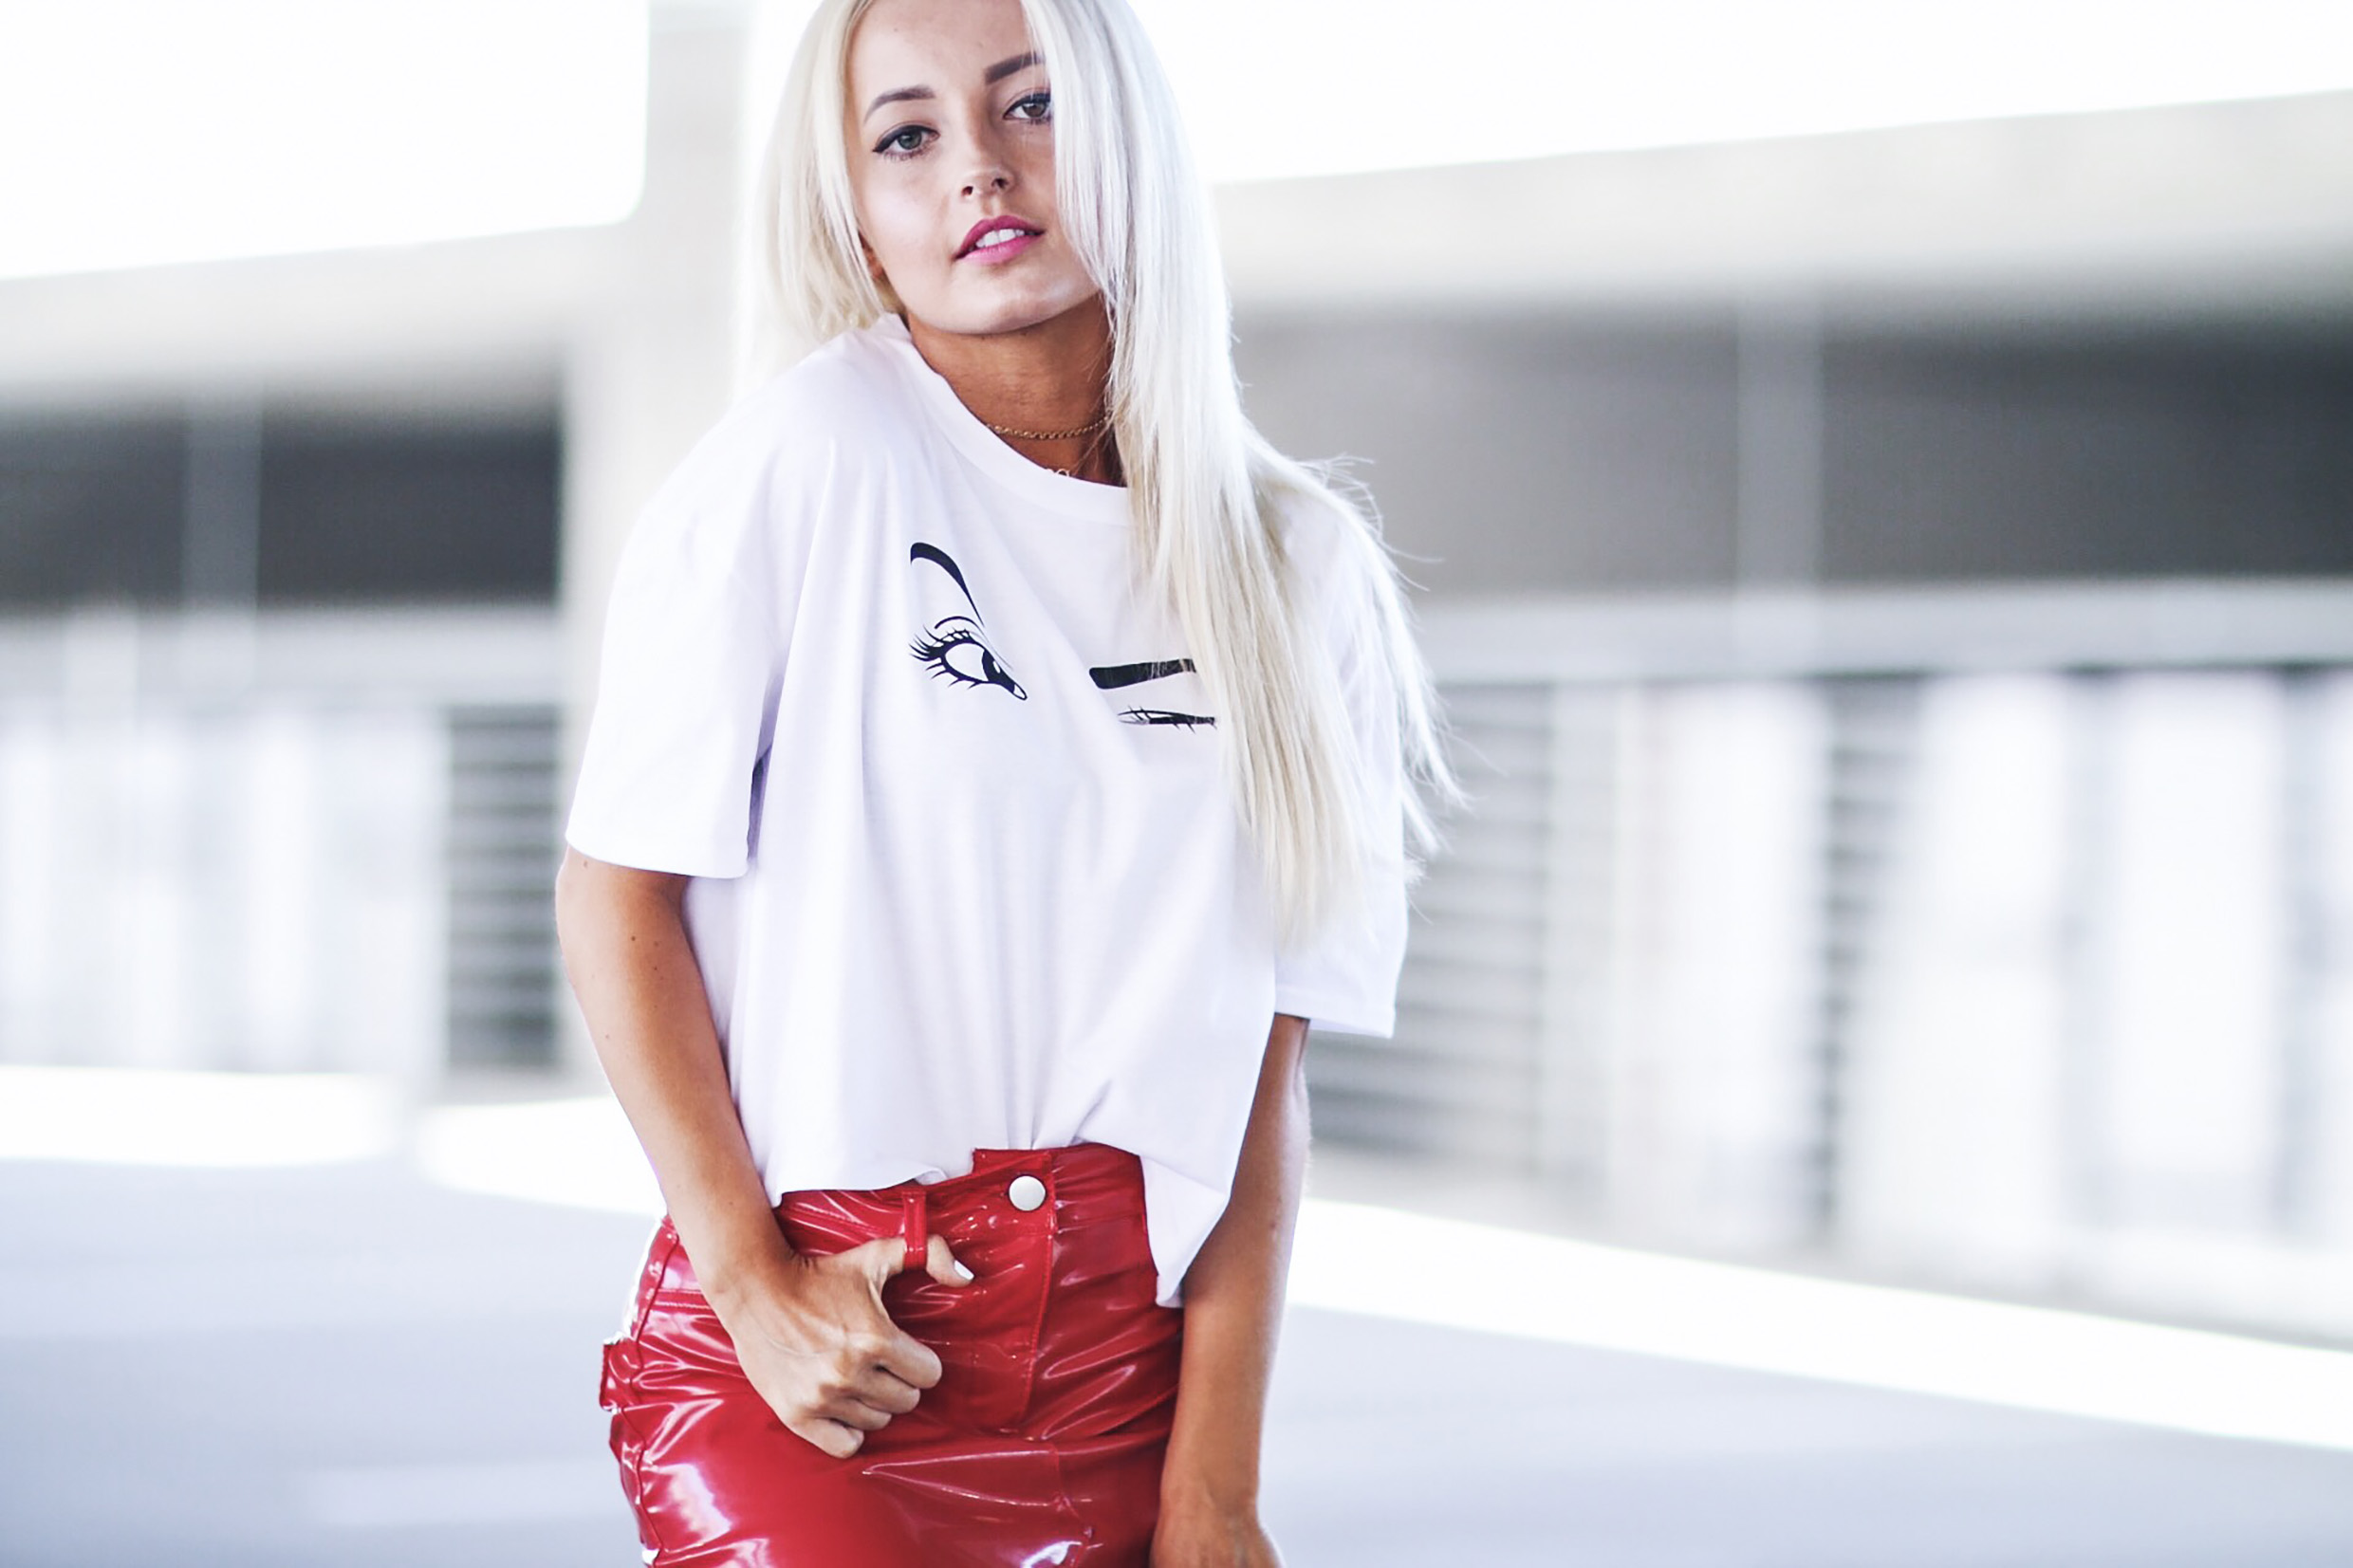 Alena Gidenko of modaprints.com styles a faux leather red skirt with a fun tee shirt